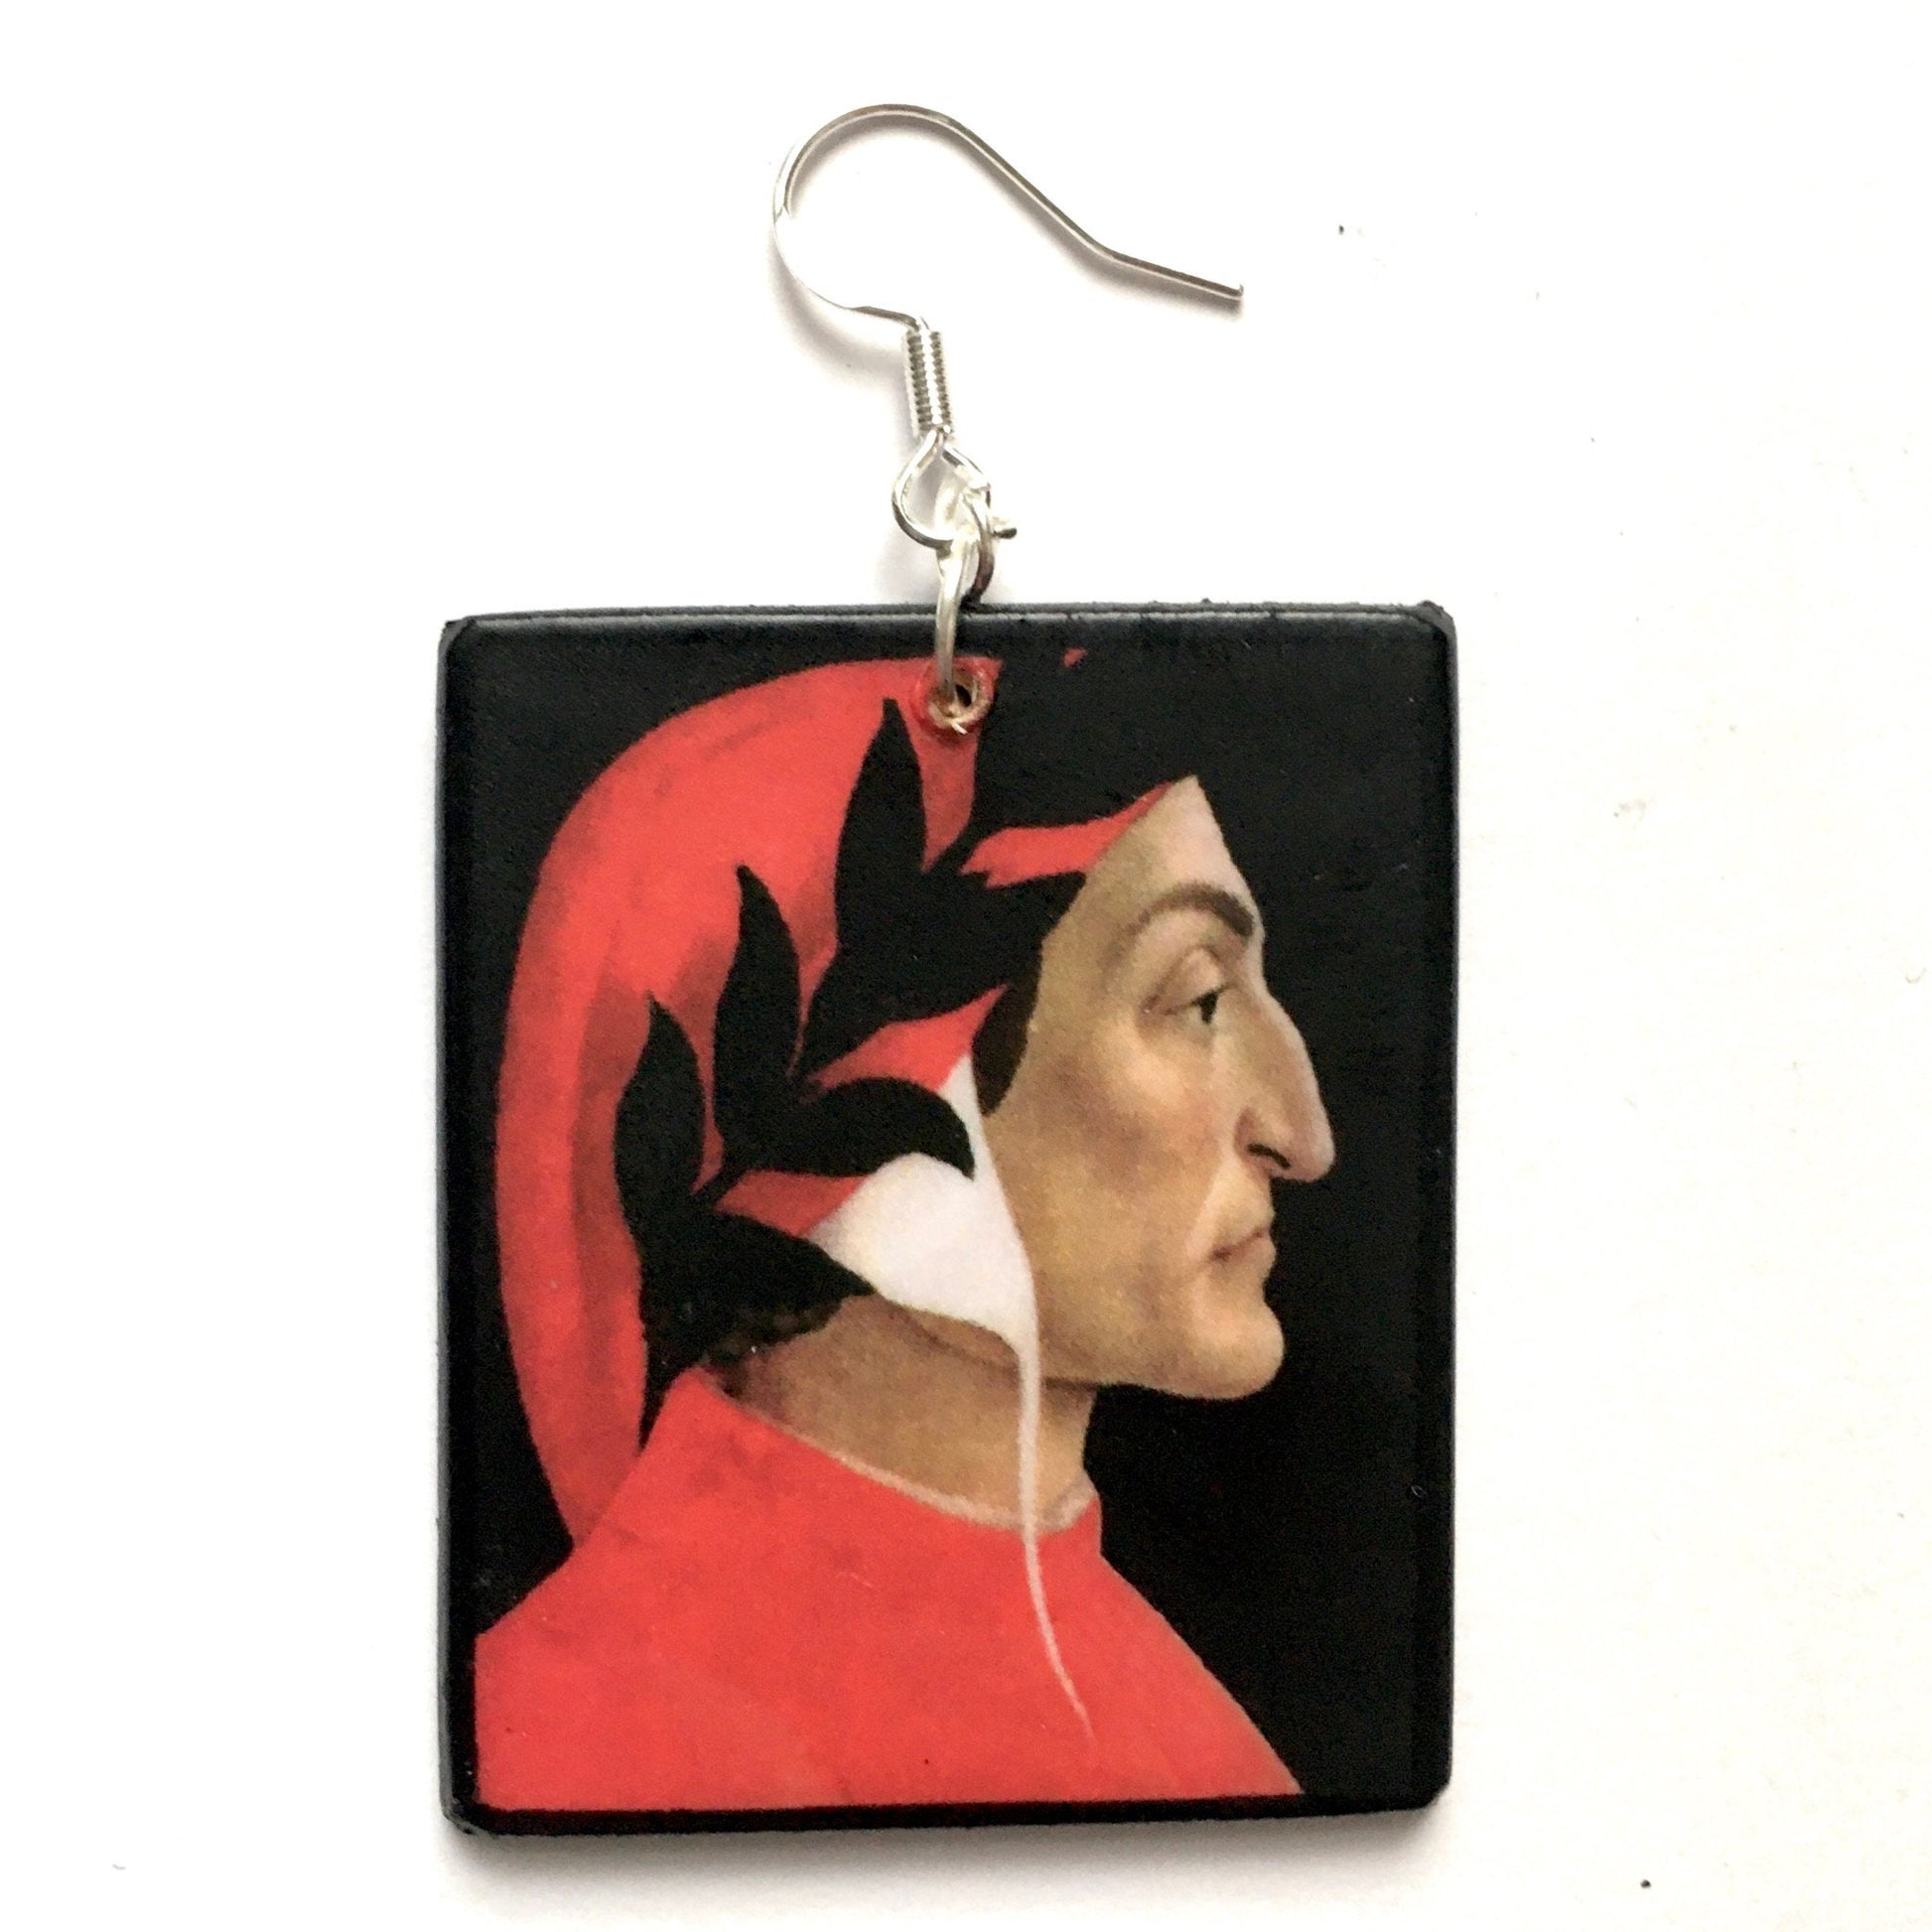 Sandro Botticelli artsy earrings. These earrings with the painting of Dante Alighiri are the cool graduation artsy gift for her. Sustainable wood with sterling silver hypoallergenic hooks. 